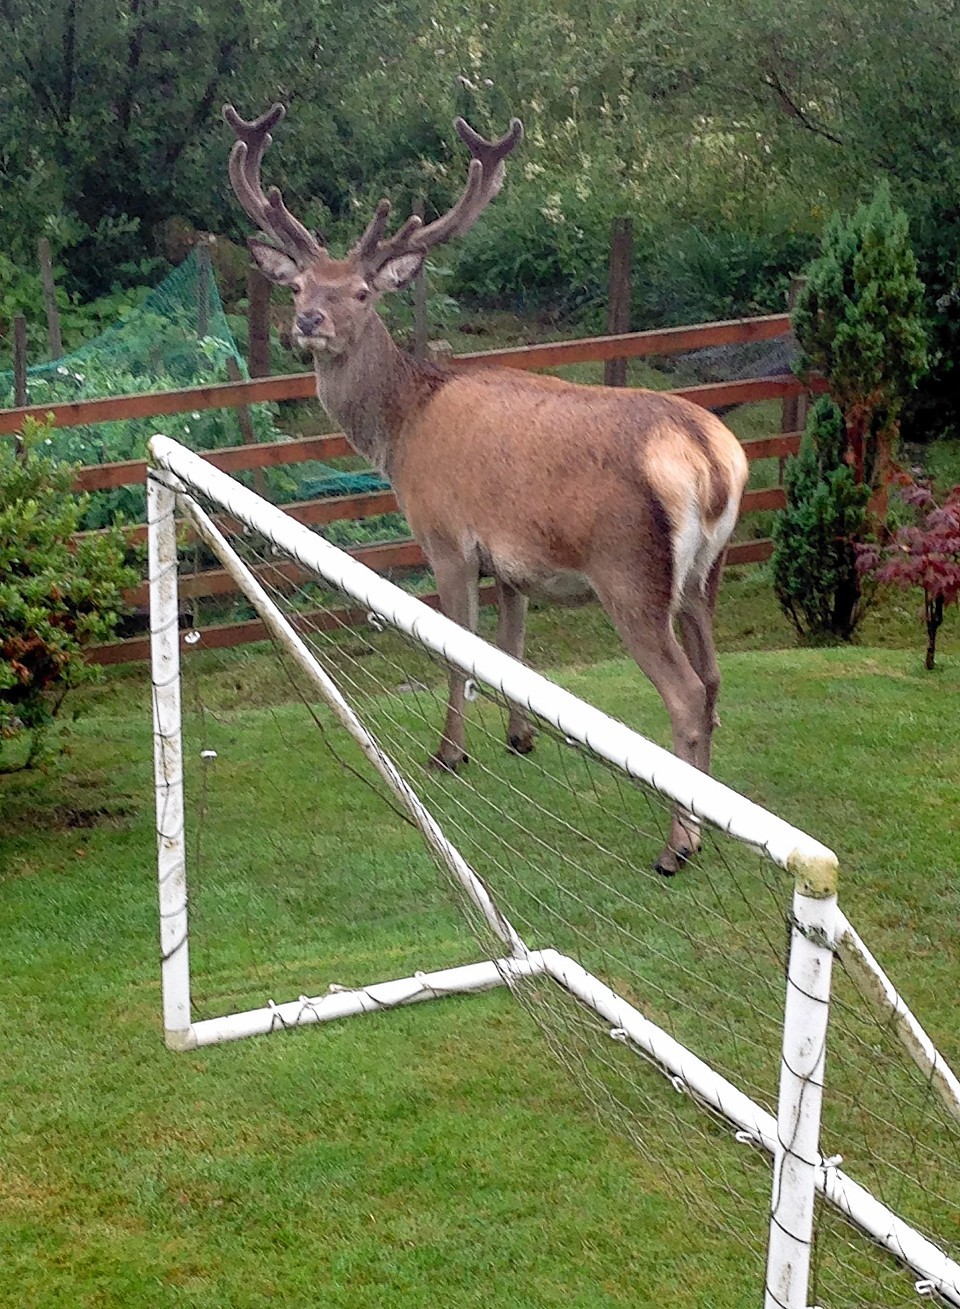 Banavie near Fort William have had daily visits from the young strawberry eating deer.